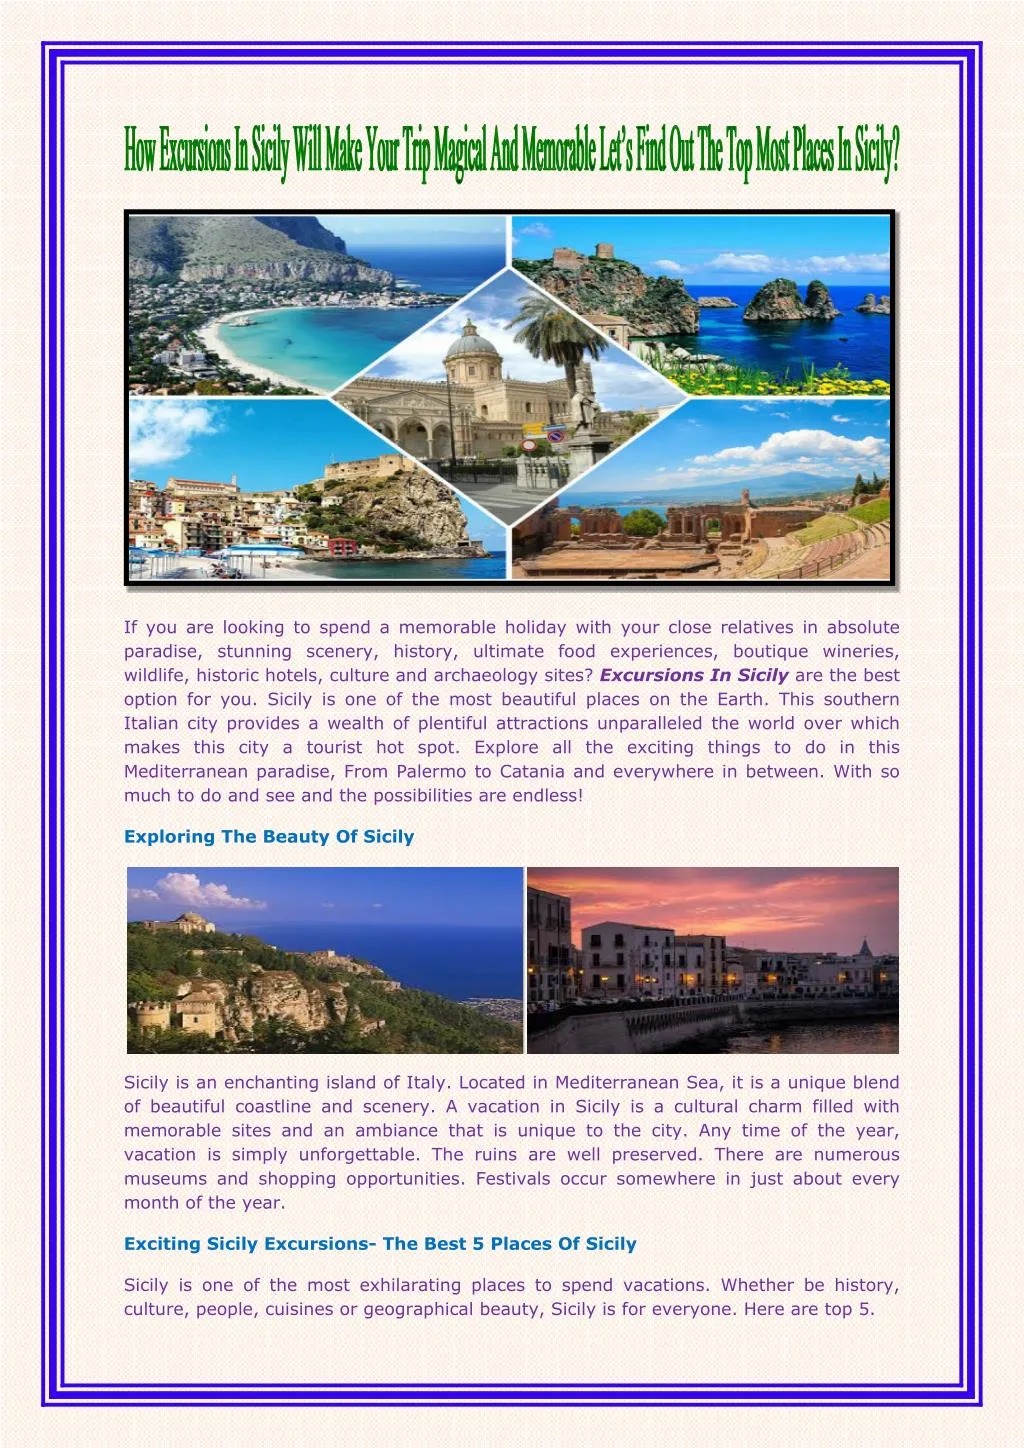 if you are looking to spend a memorable holiday